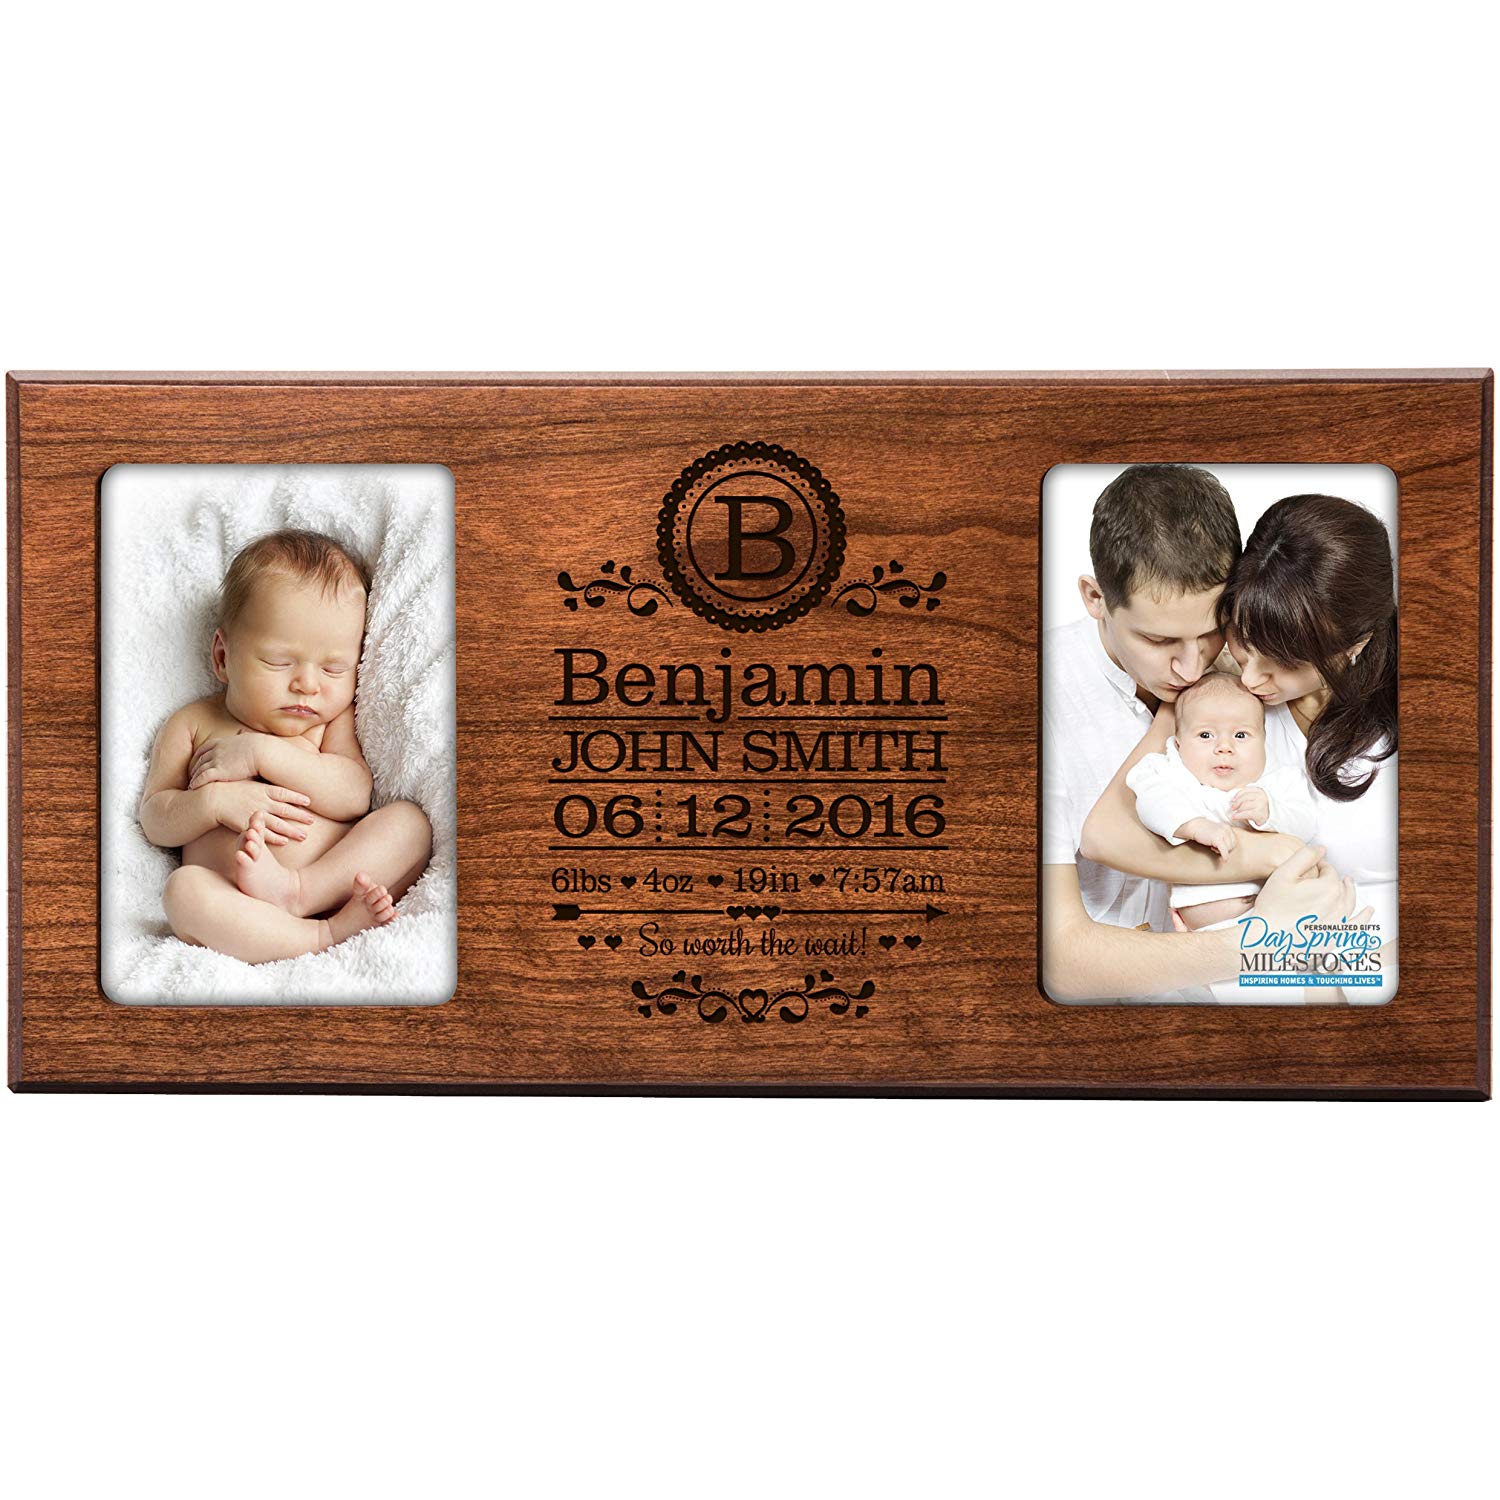 Personalized Baby Engraved Cherry Double Photo Frame - Worth The Wait - LifeSong Milestones